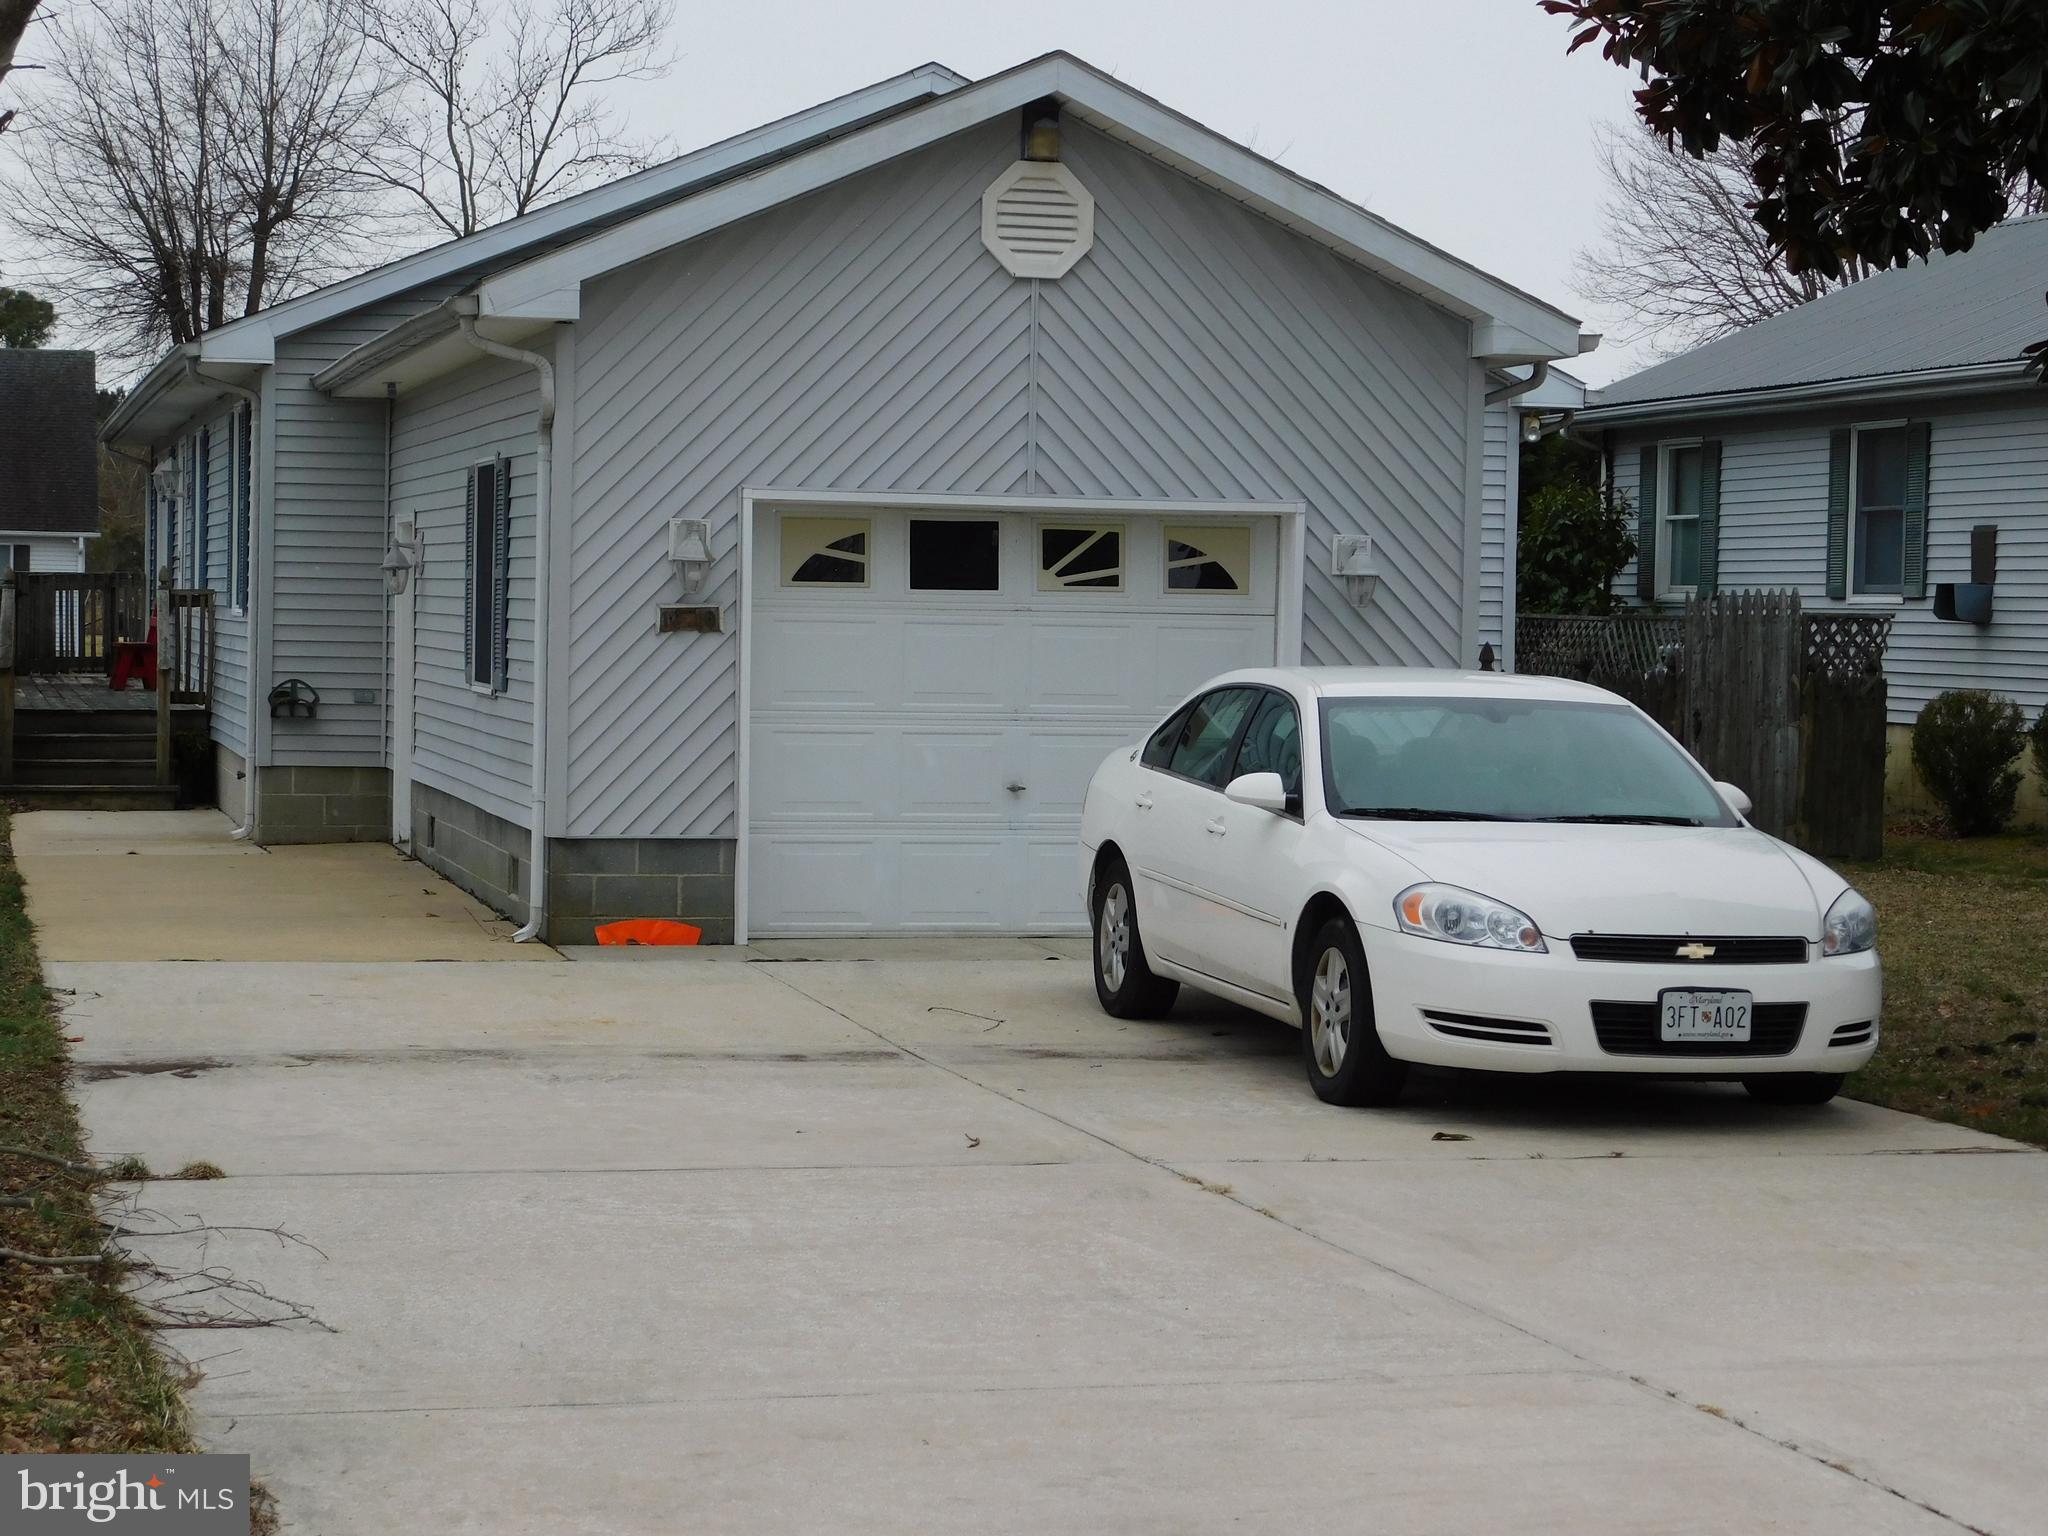 a front view of a house with parking space